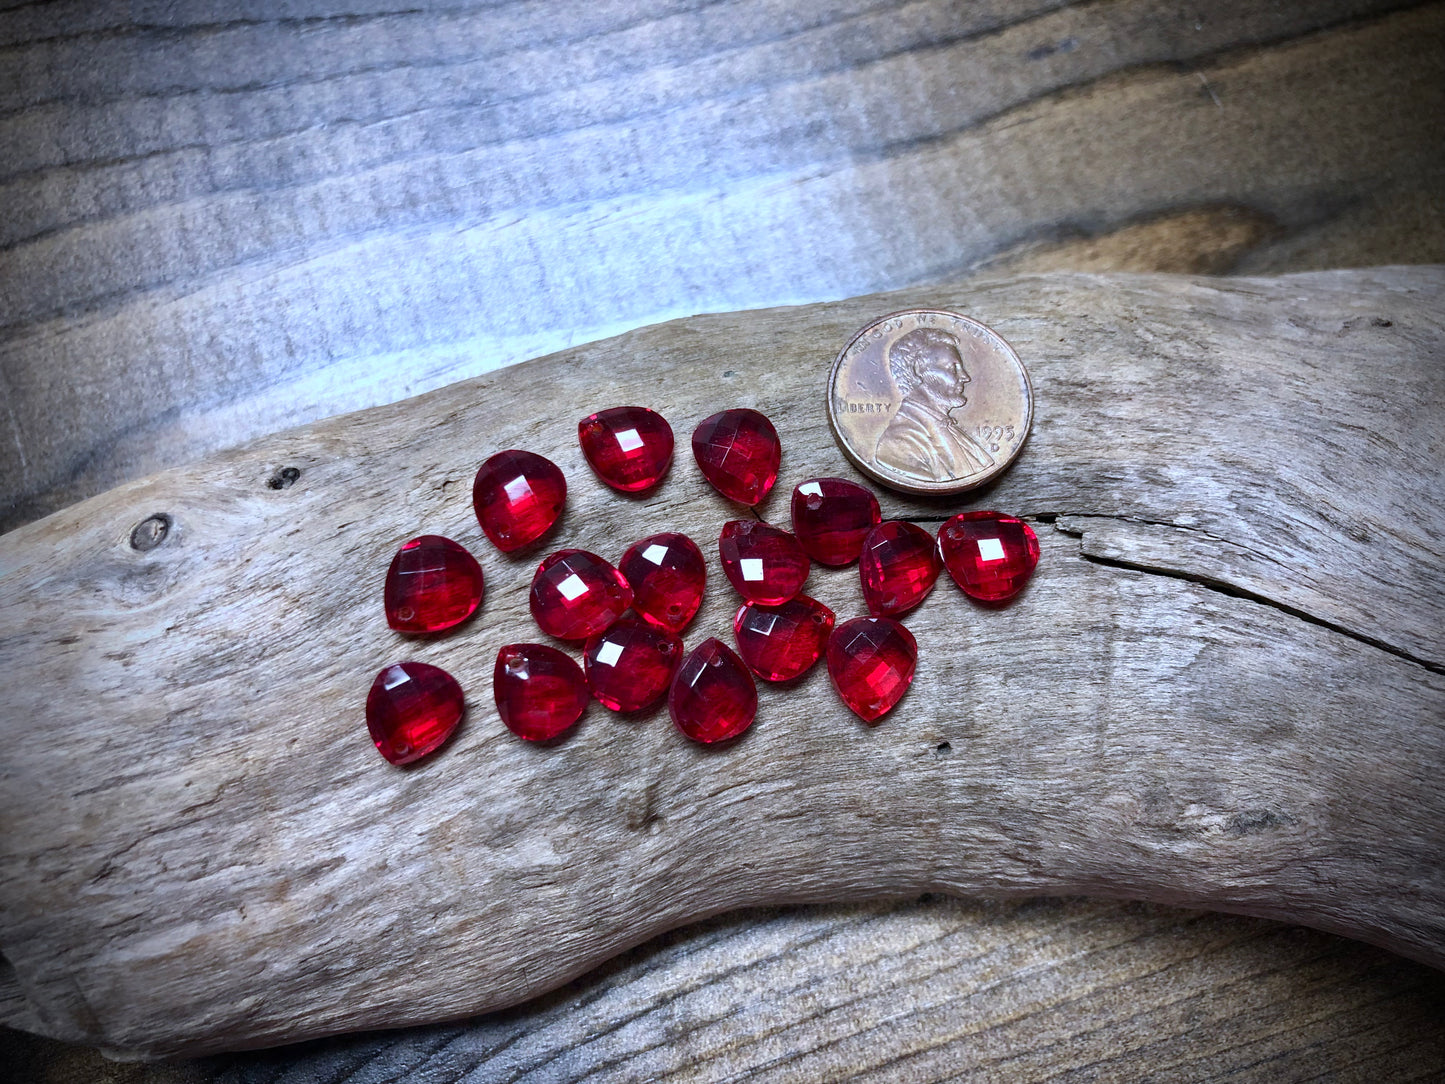 Vintage Czech Glass Faceted Briolette Bead - 9mm x 8mm - Ruby